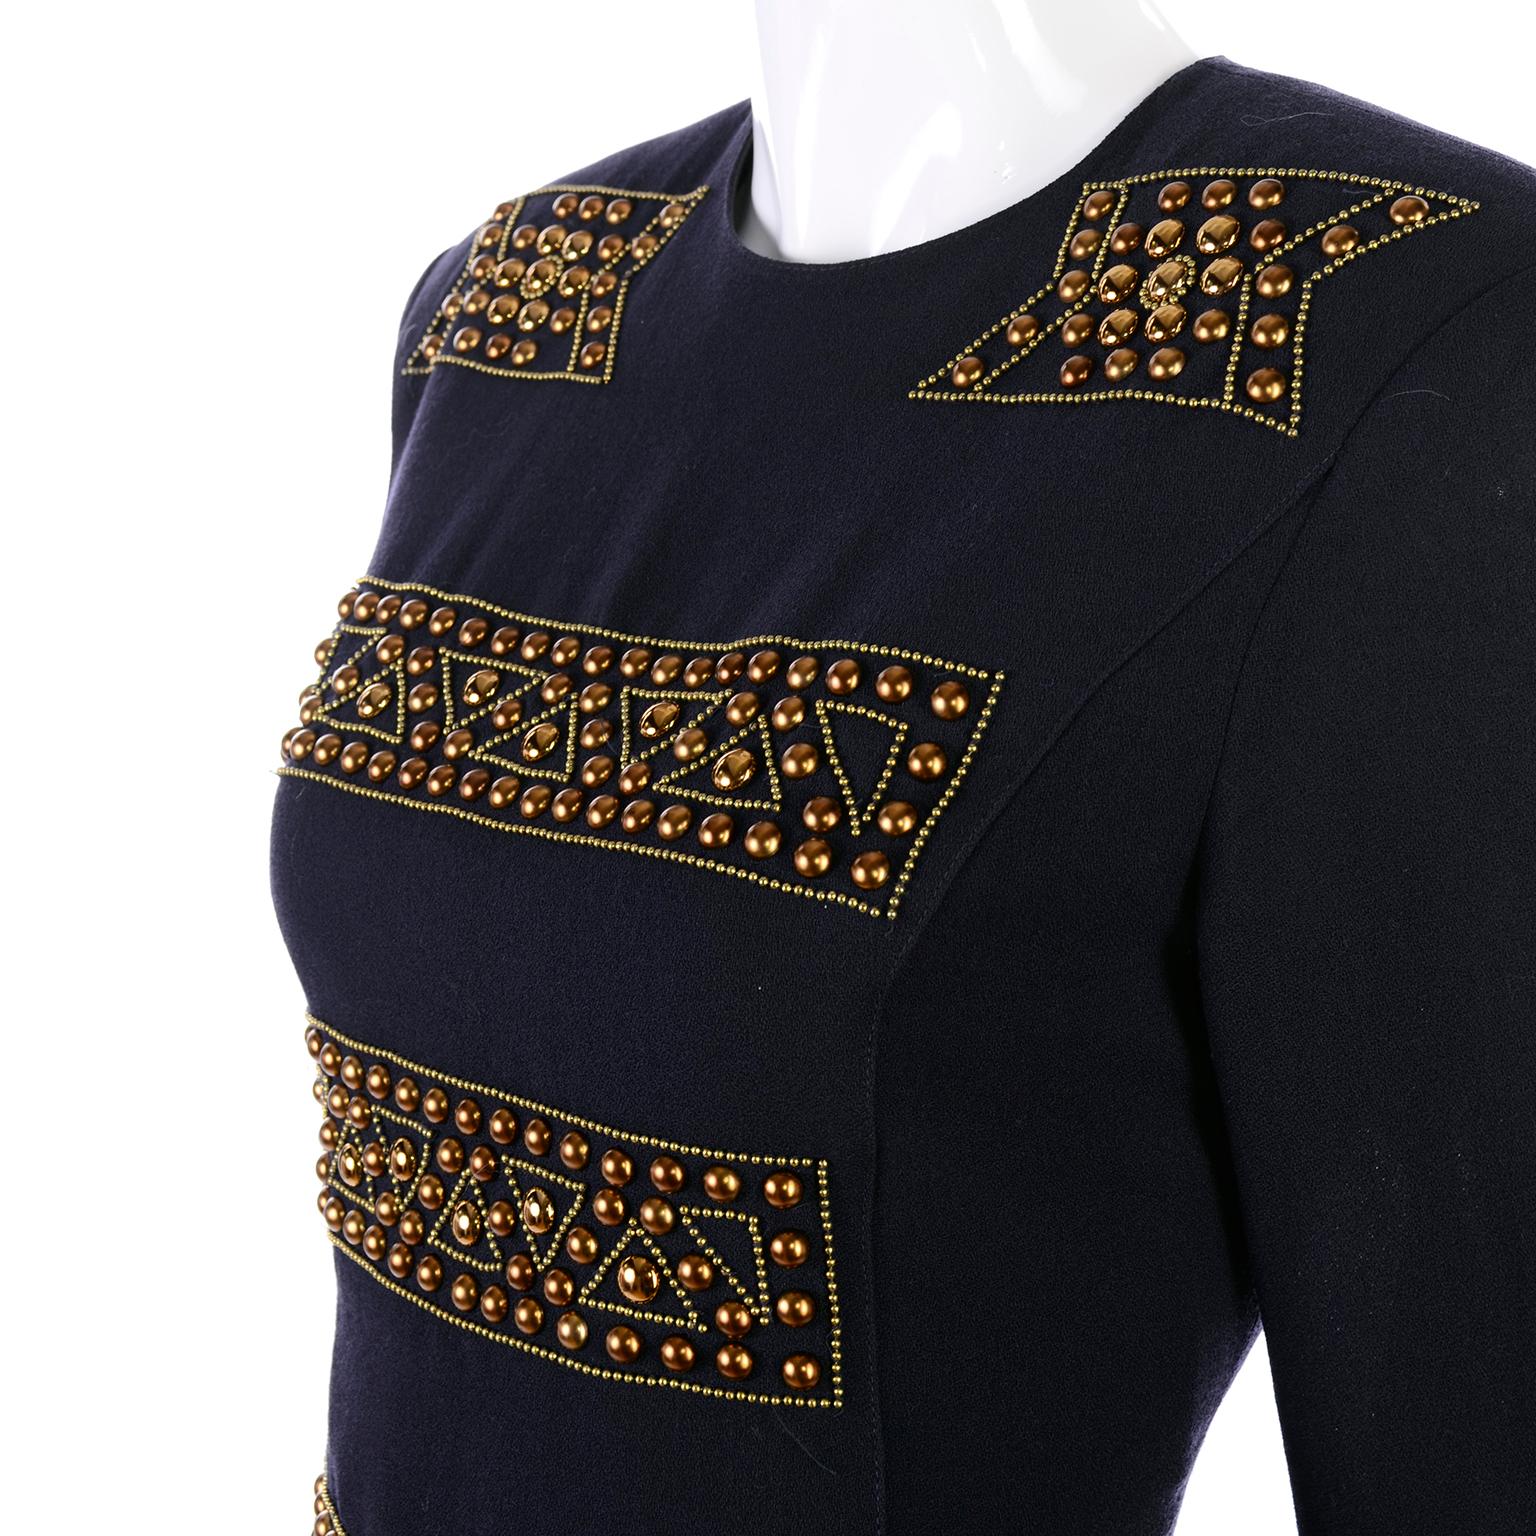 This is a fun 1980's Louis Feraud vintage knit dress with long sleeves in a midnight blue - almost black wool knit. This 100% wool vintage dress is lined in viscose and has great copper beads. The dress zips up the back, is marked as a size 4, and